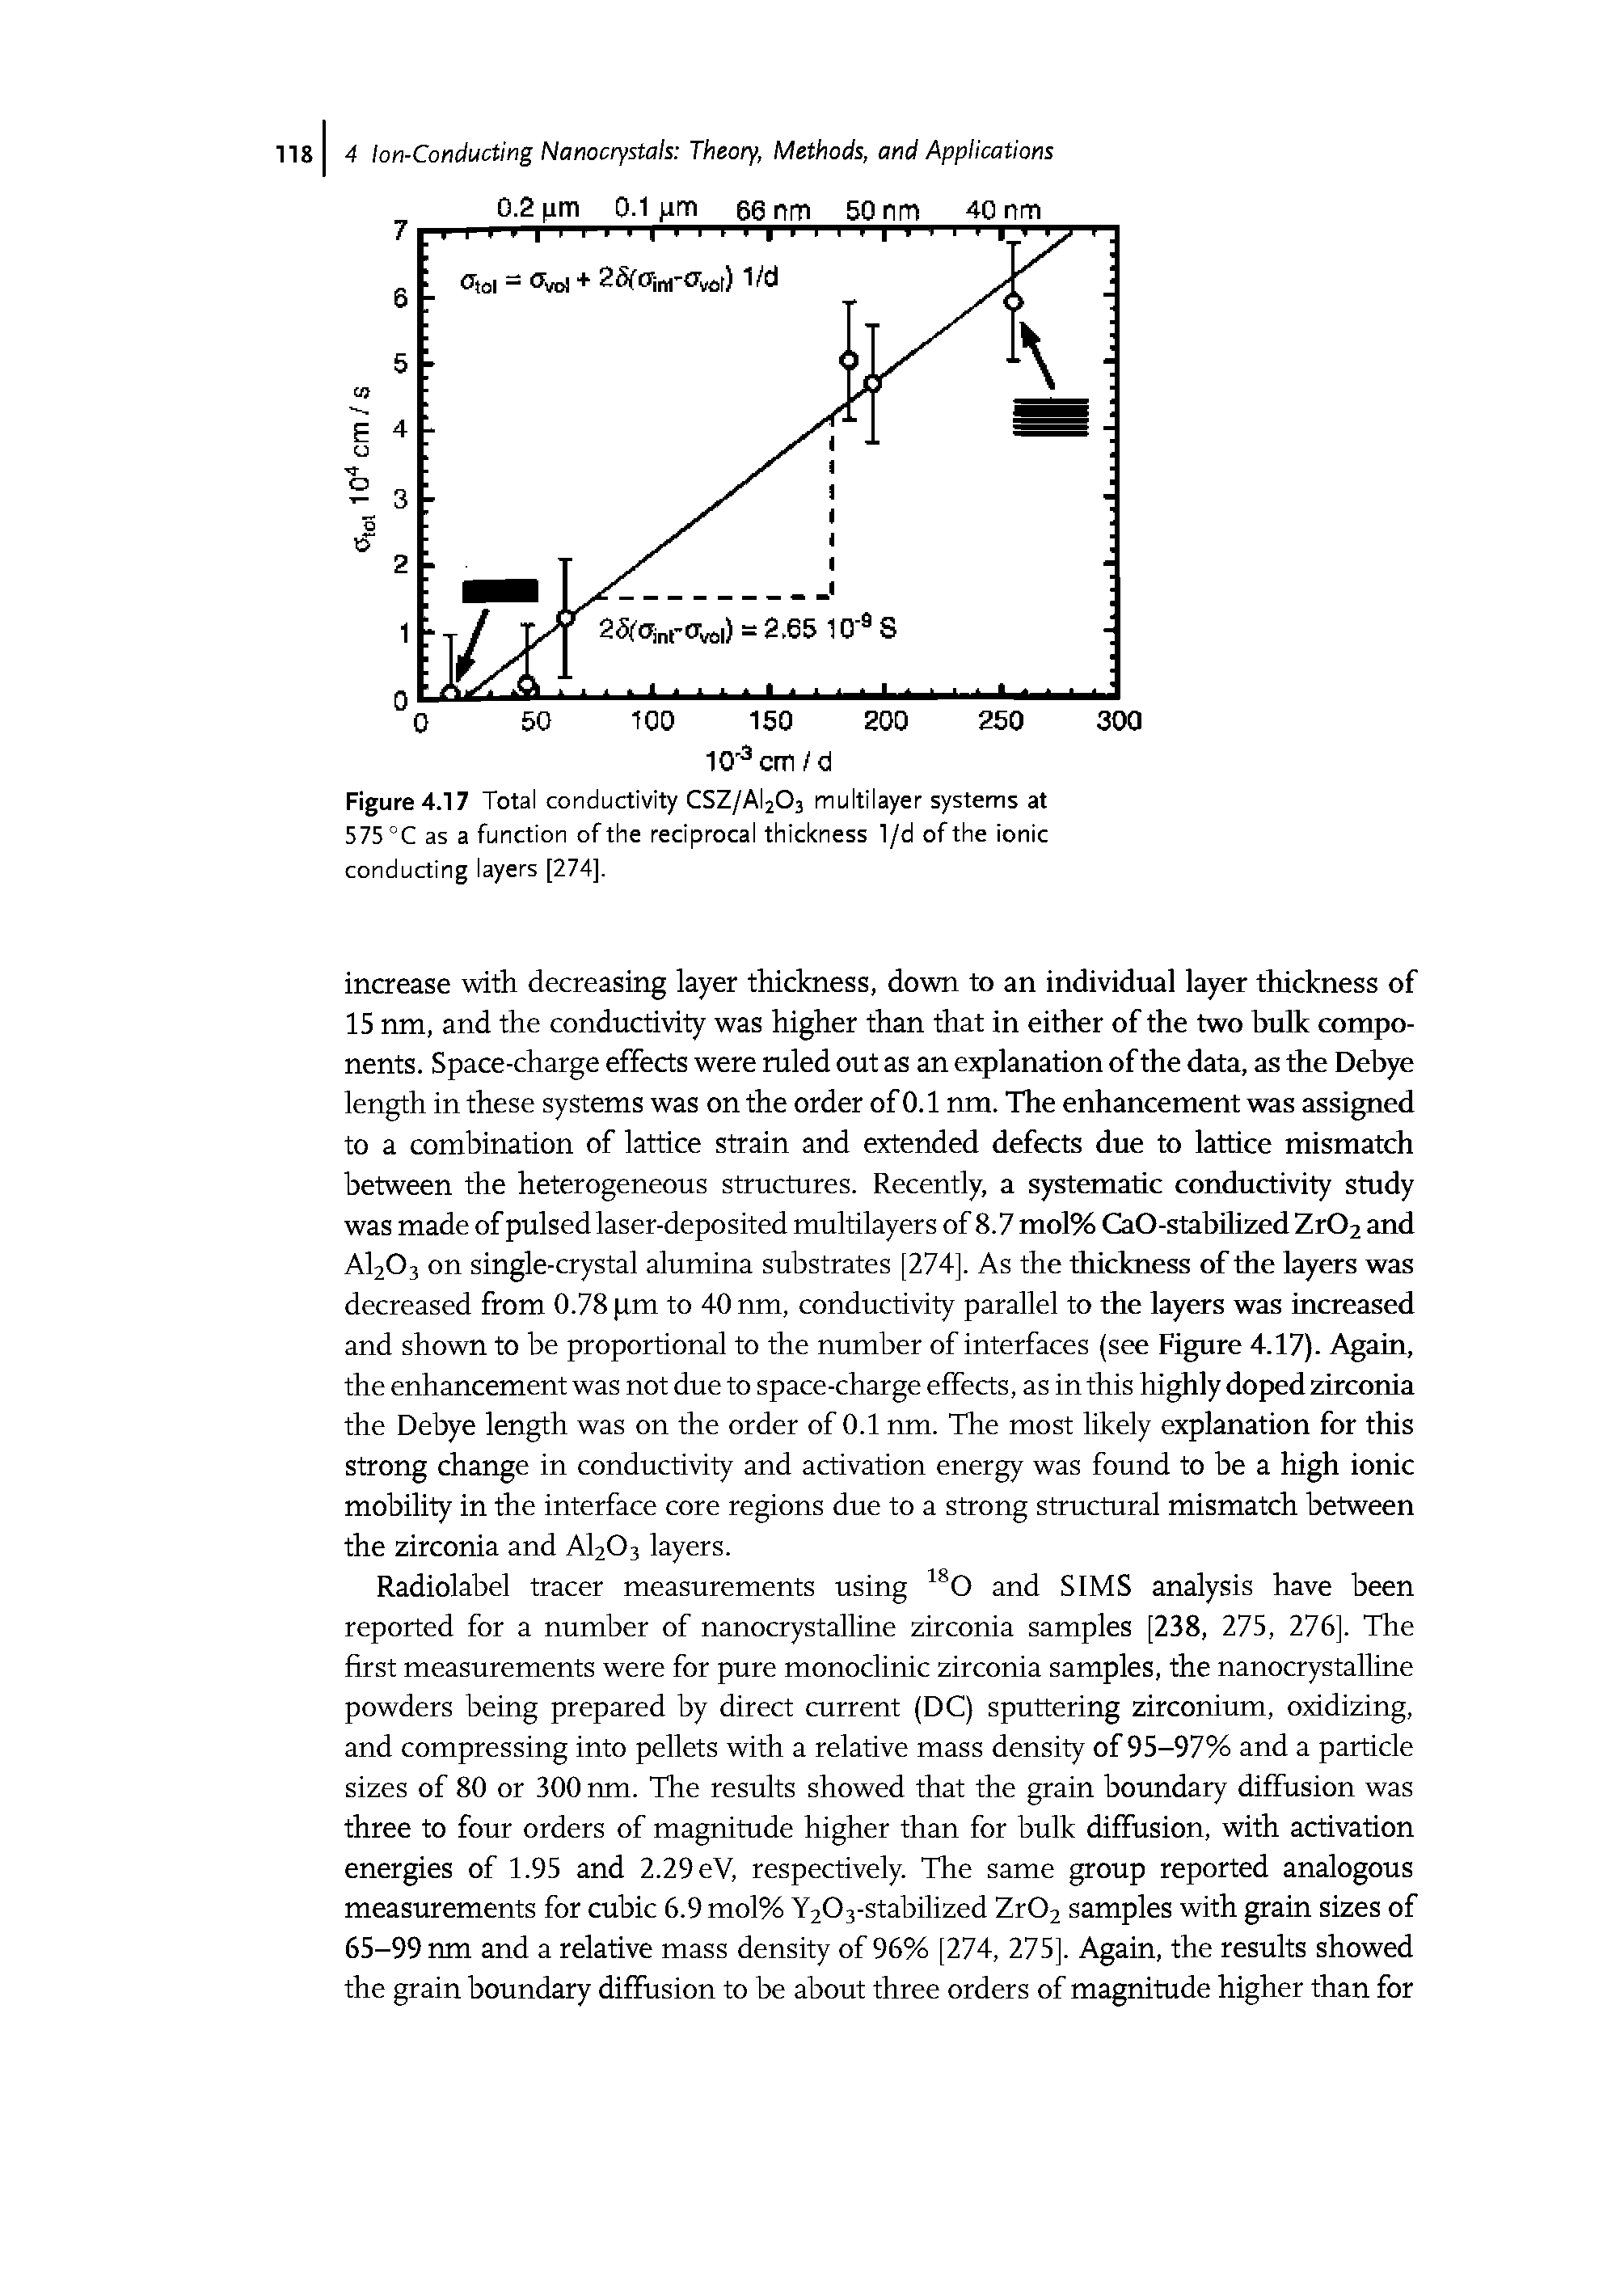 Figure 4.17 Total conductivity CSZ/AI2O3 multilayer systems at 575 °C as a function of the reciprocal thickness 1/d of the ionic conducting layers [274].